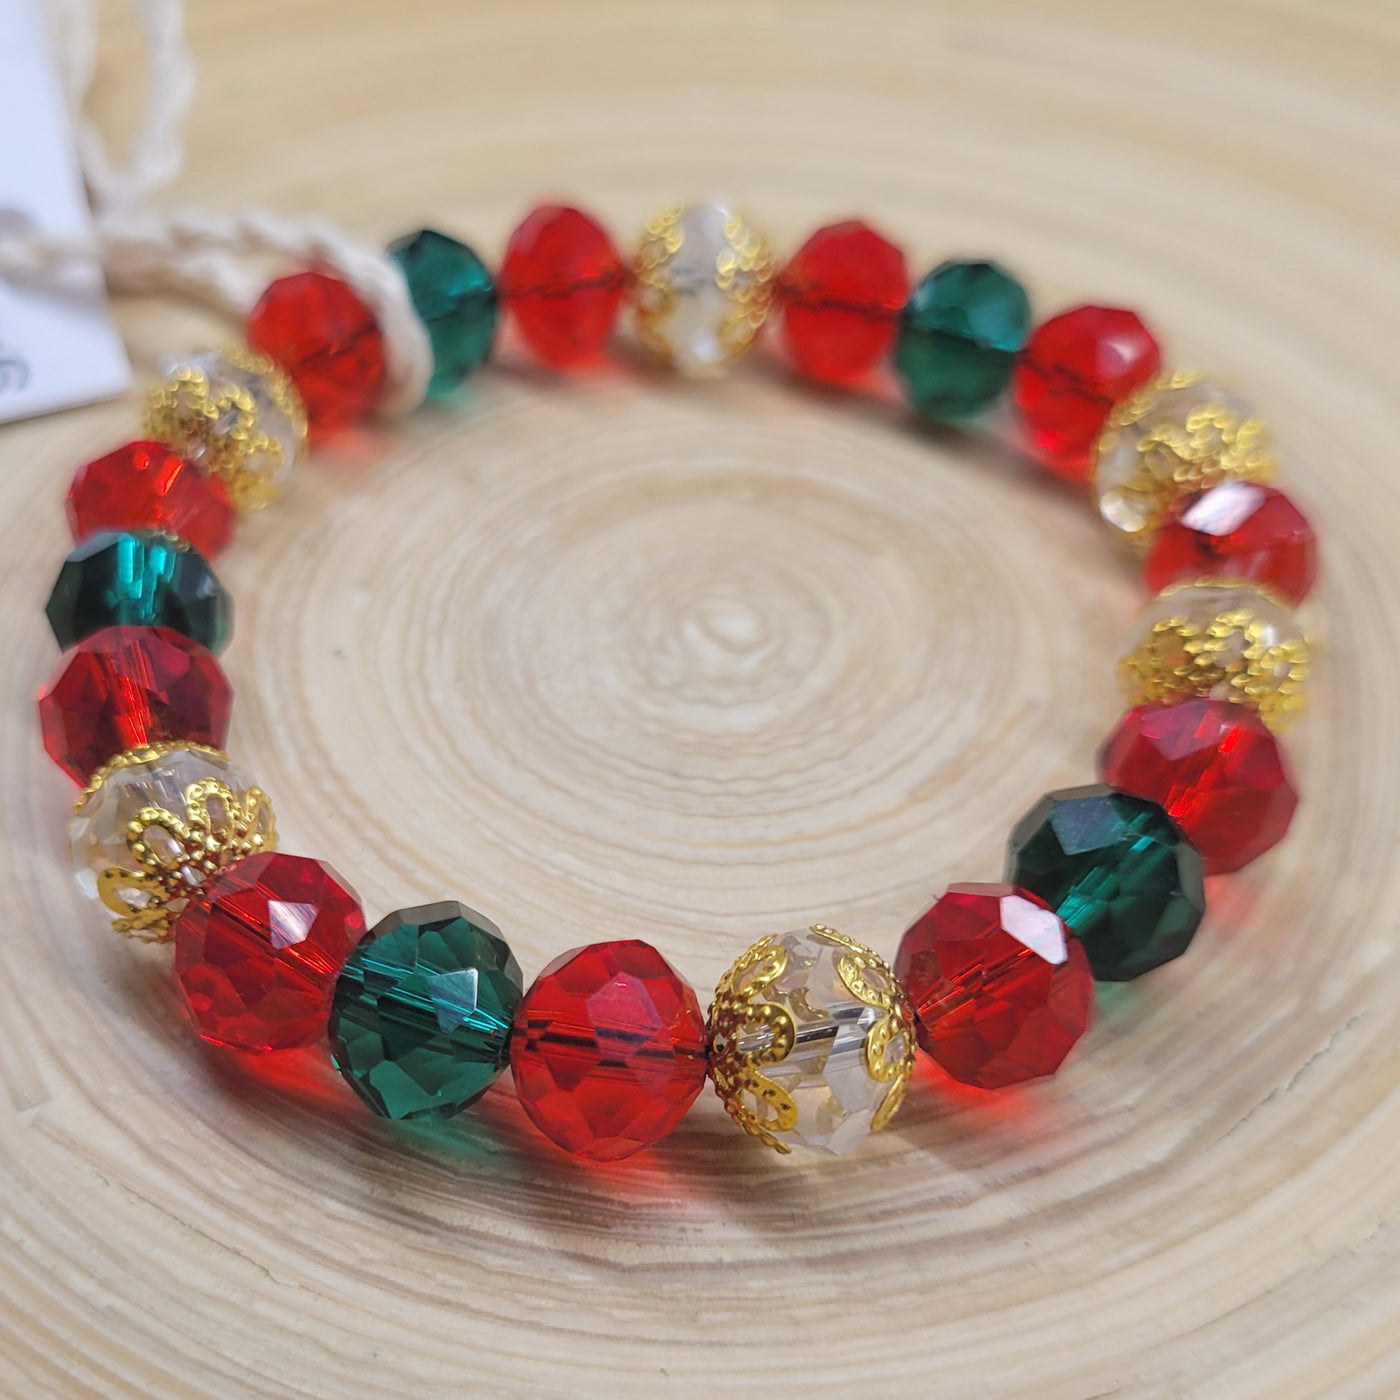 DBV- Bingcute Briolette Crystal Sian Red and Emerald Glass Beads with Gold Spacer Bead Bracelet